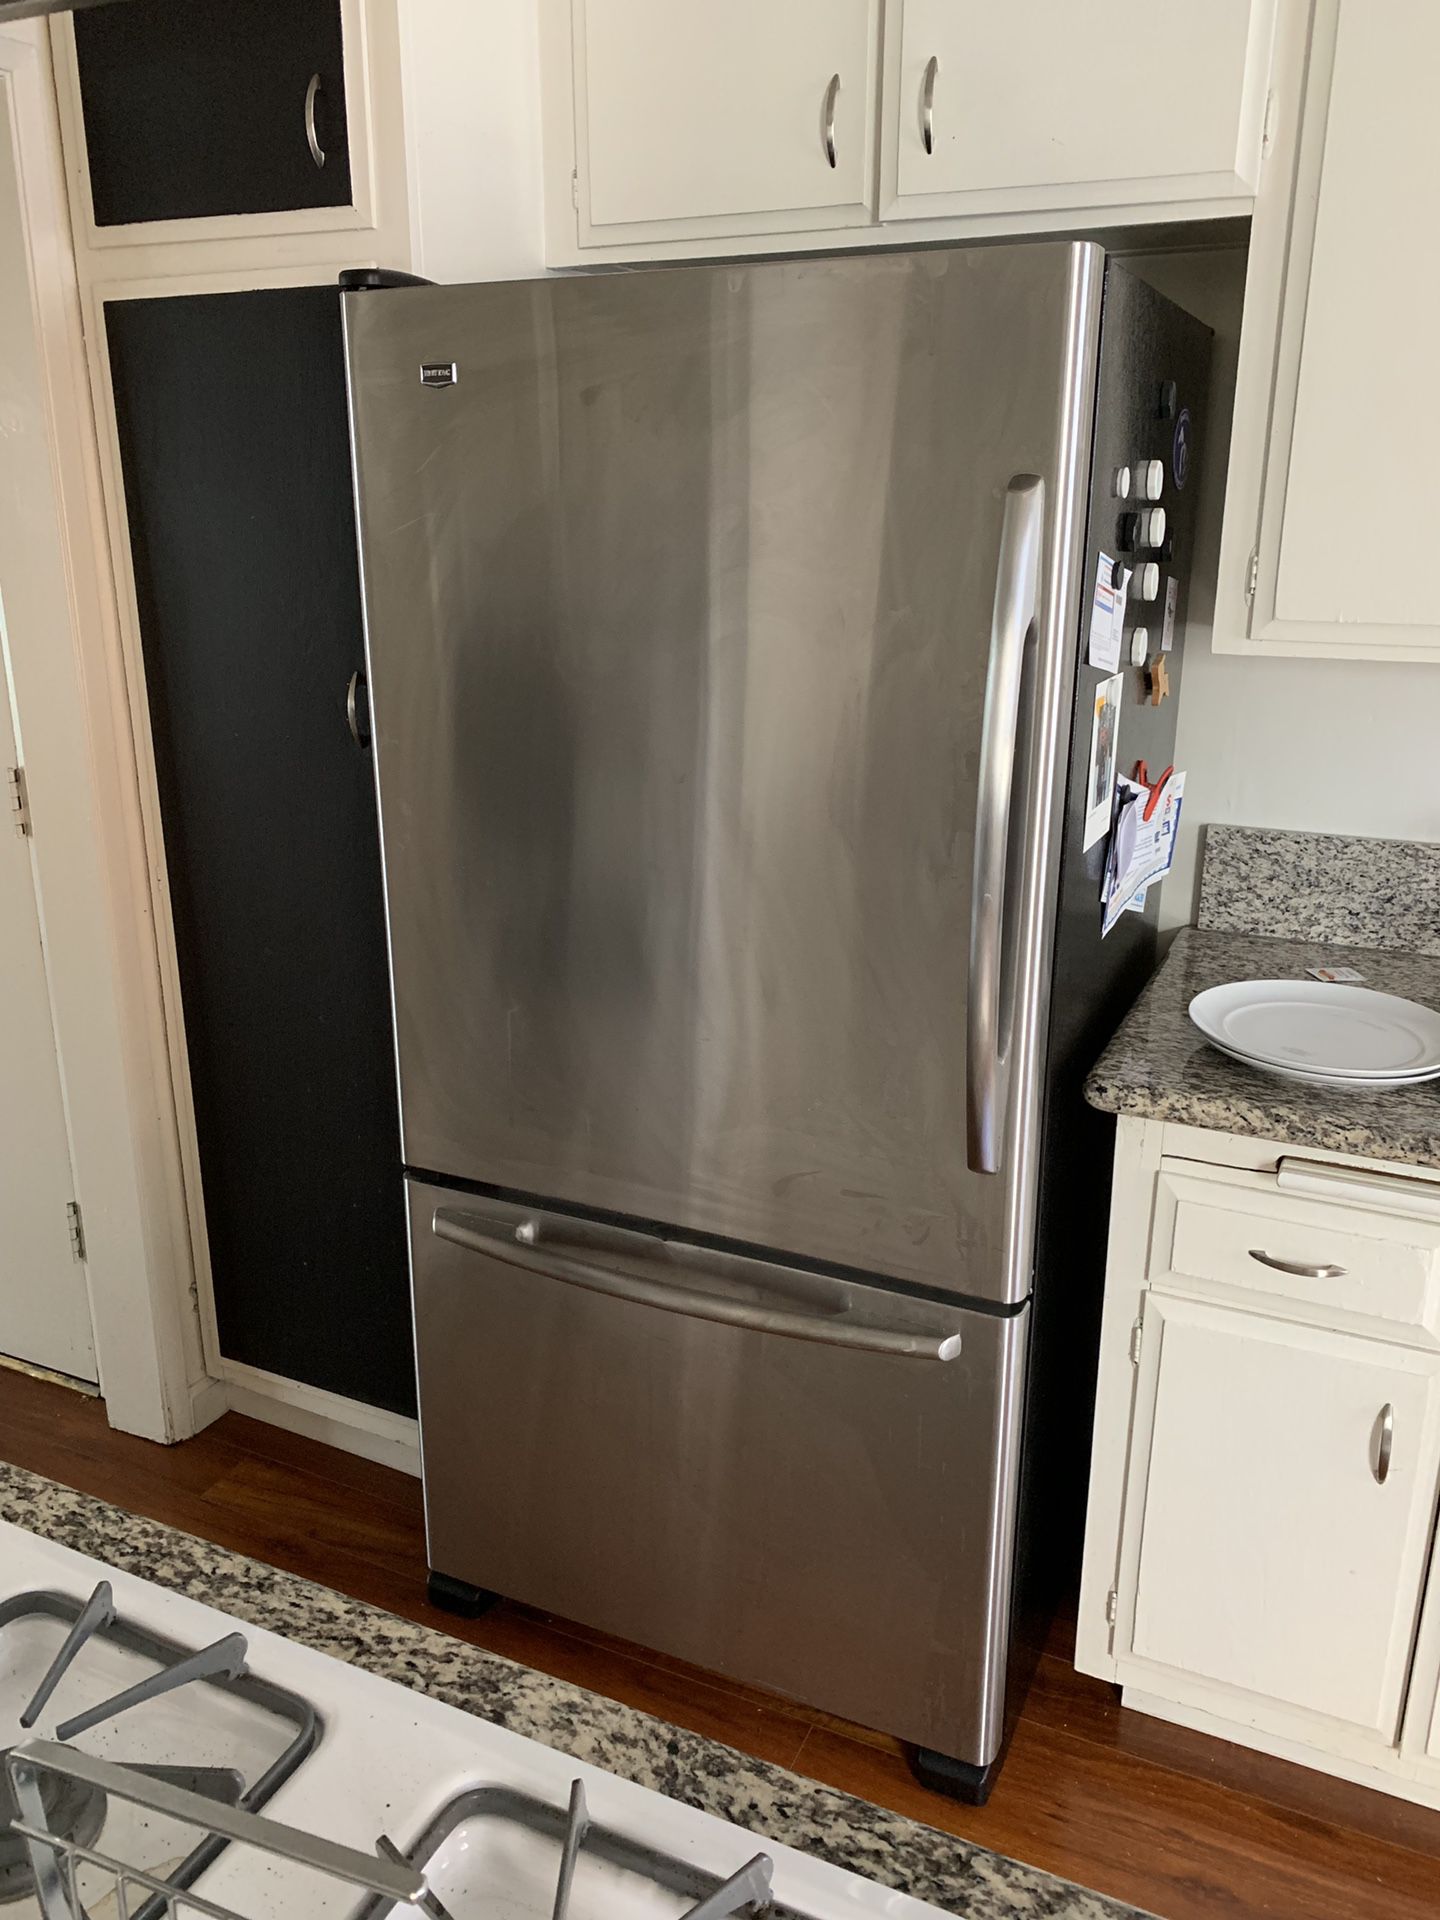 Maytag stainless refrigerator